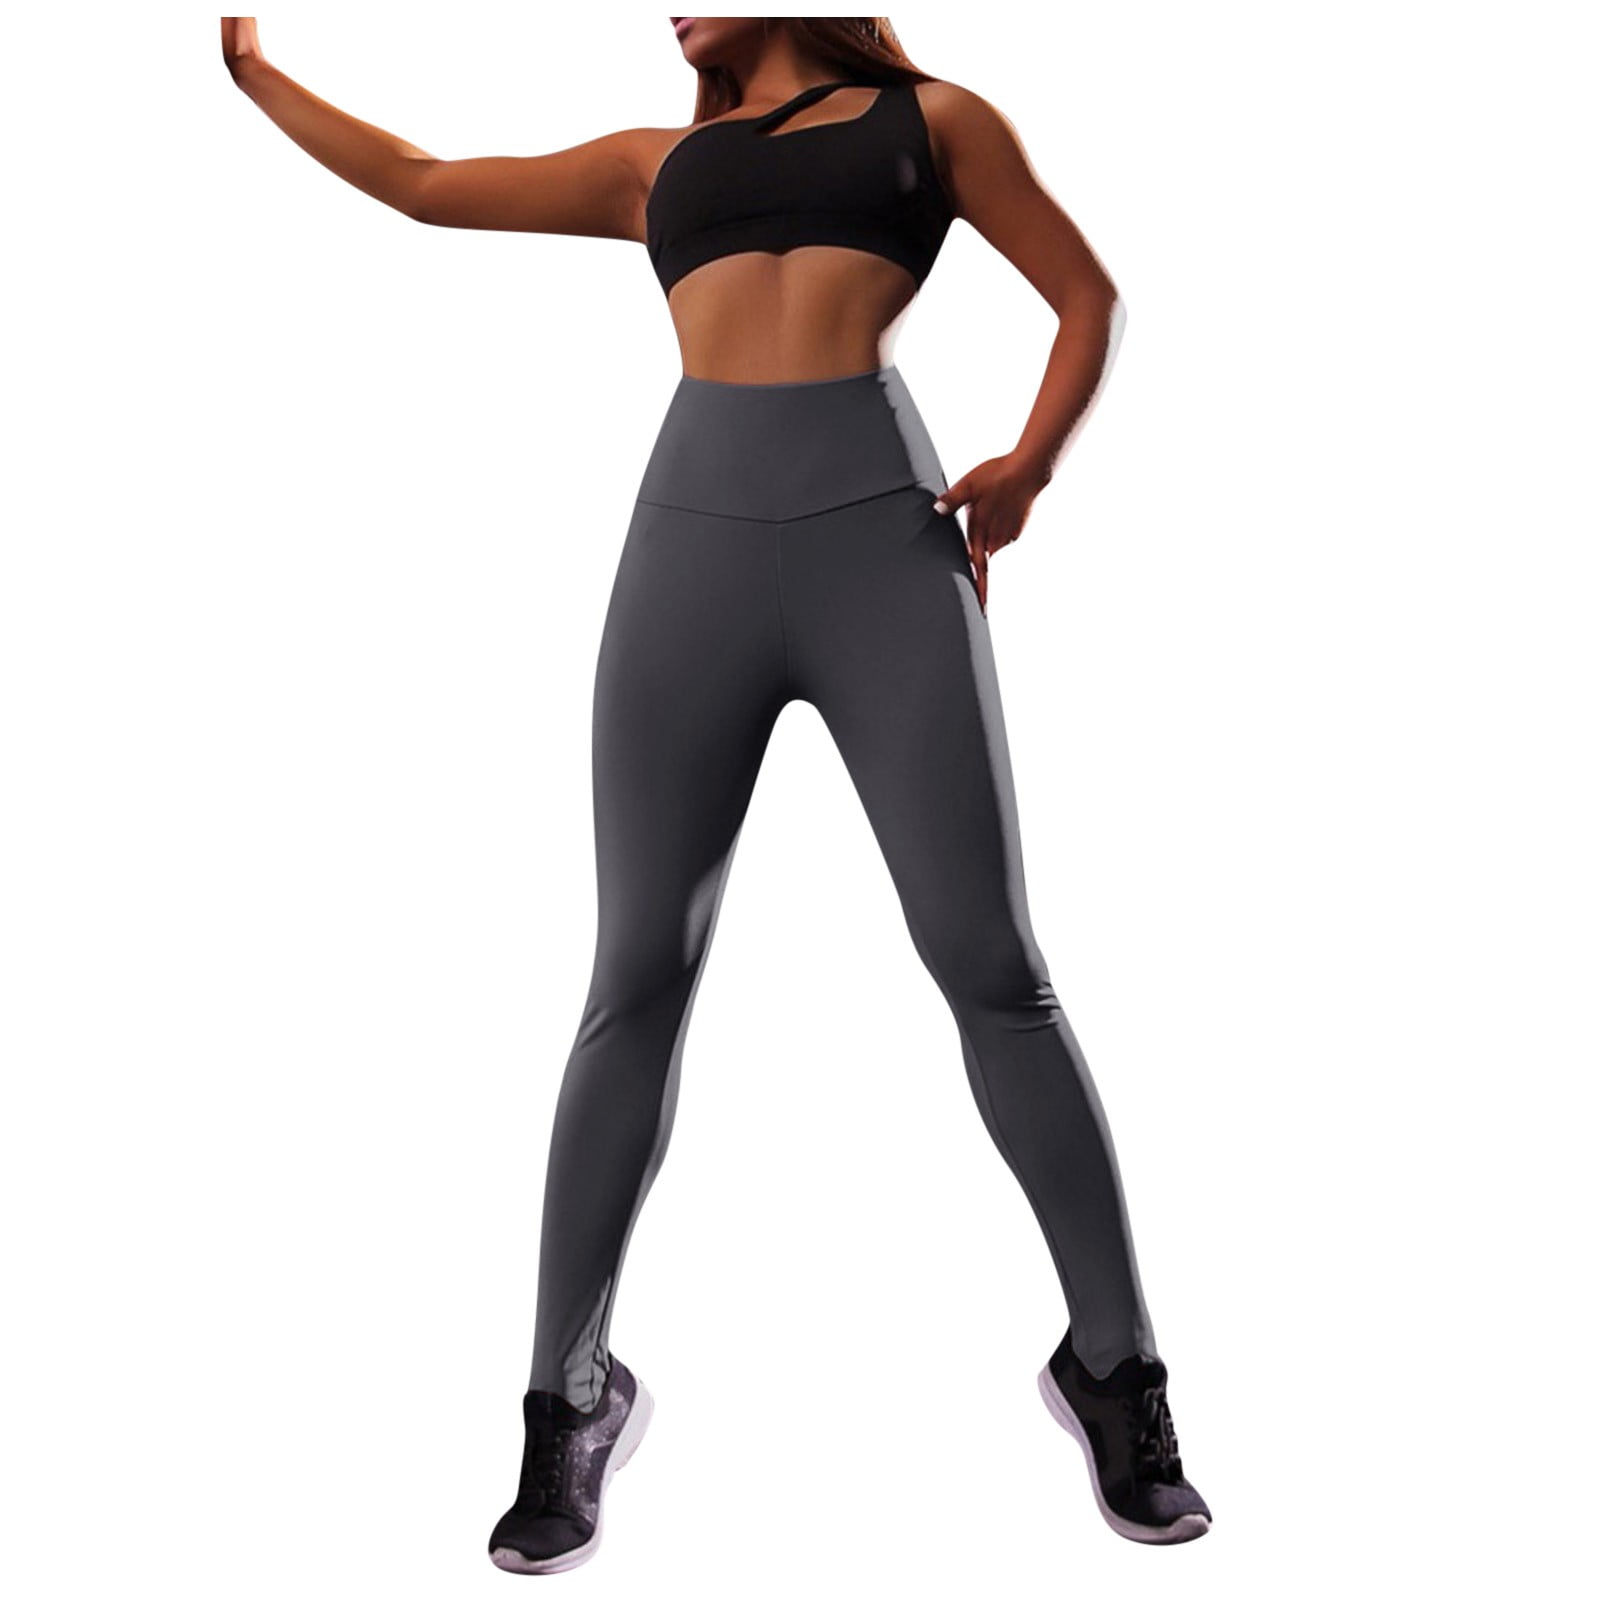  FIT USA Women's High Waist Active Yoga Pants Full Length  Leggings with Pockets-NY10L28-CHARCOAL-XL : Clothing, Shoes & Jewelry